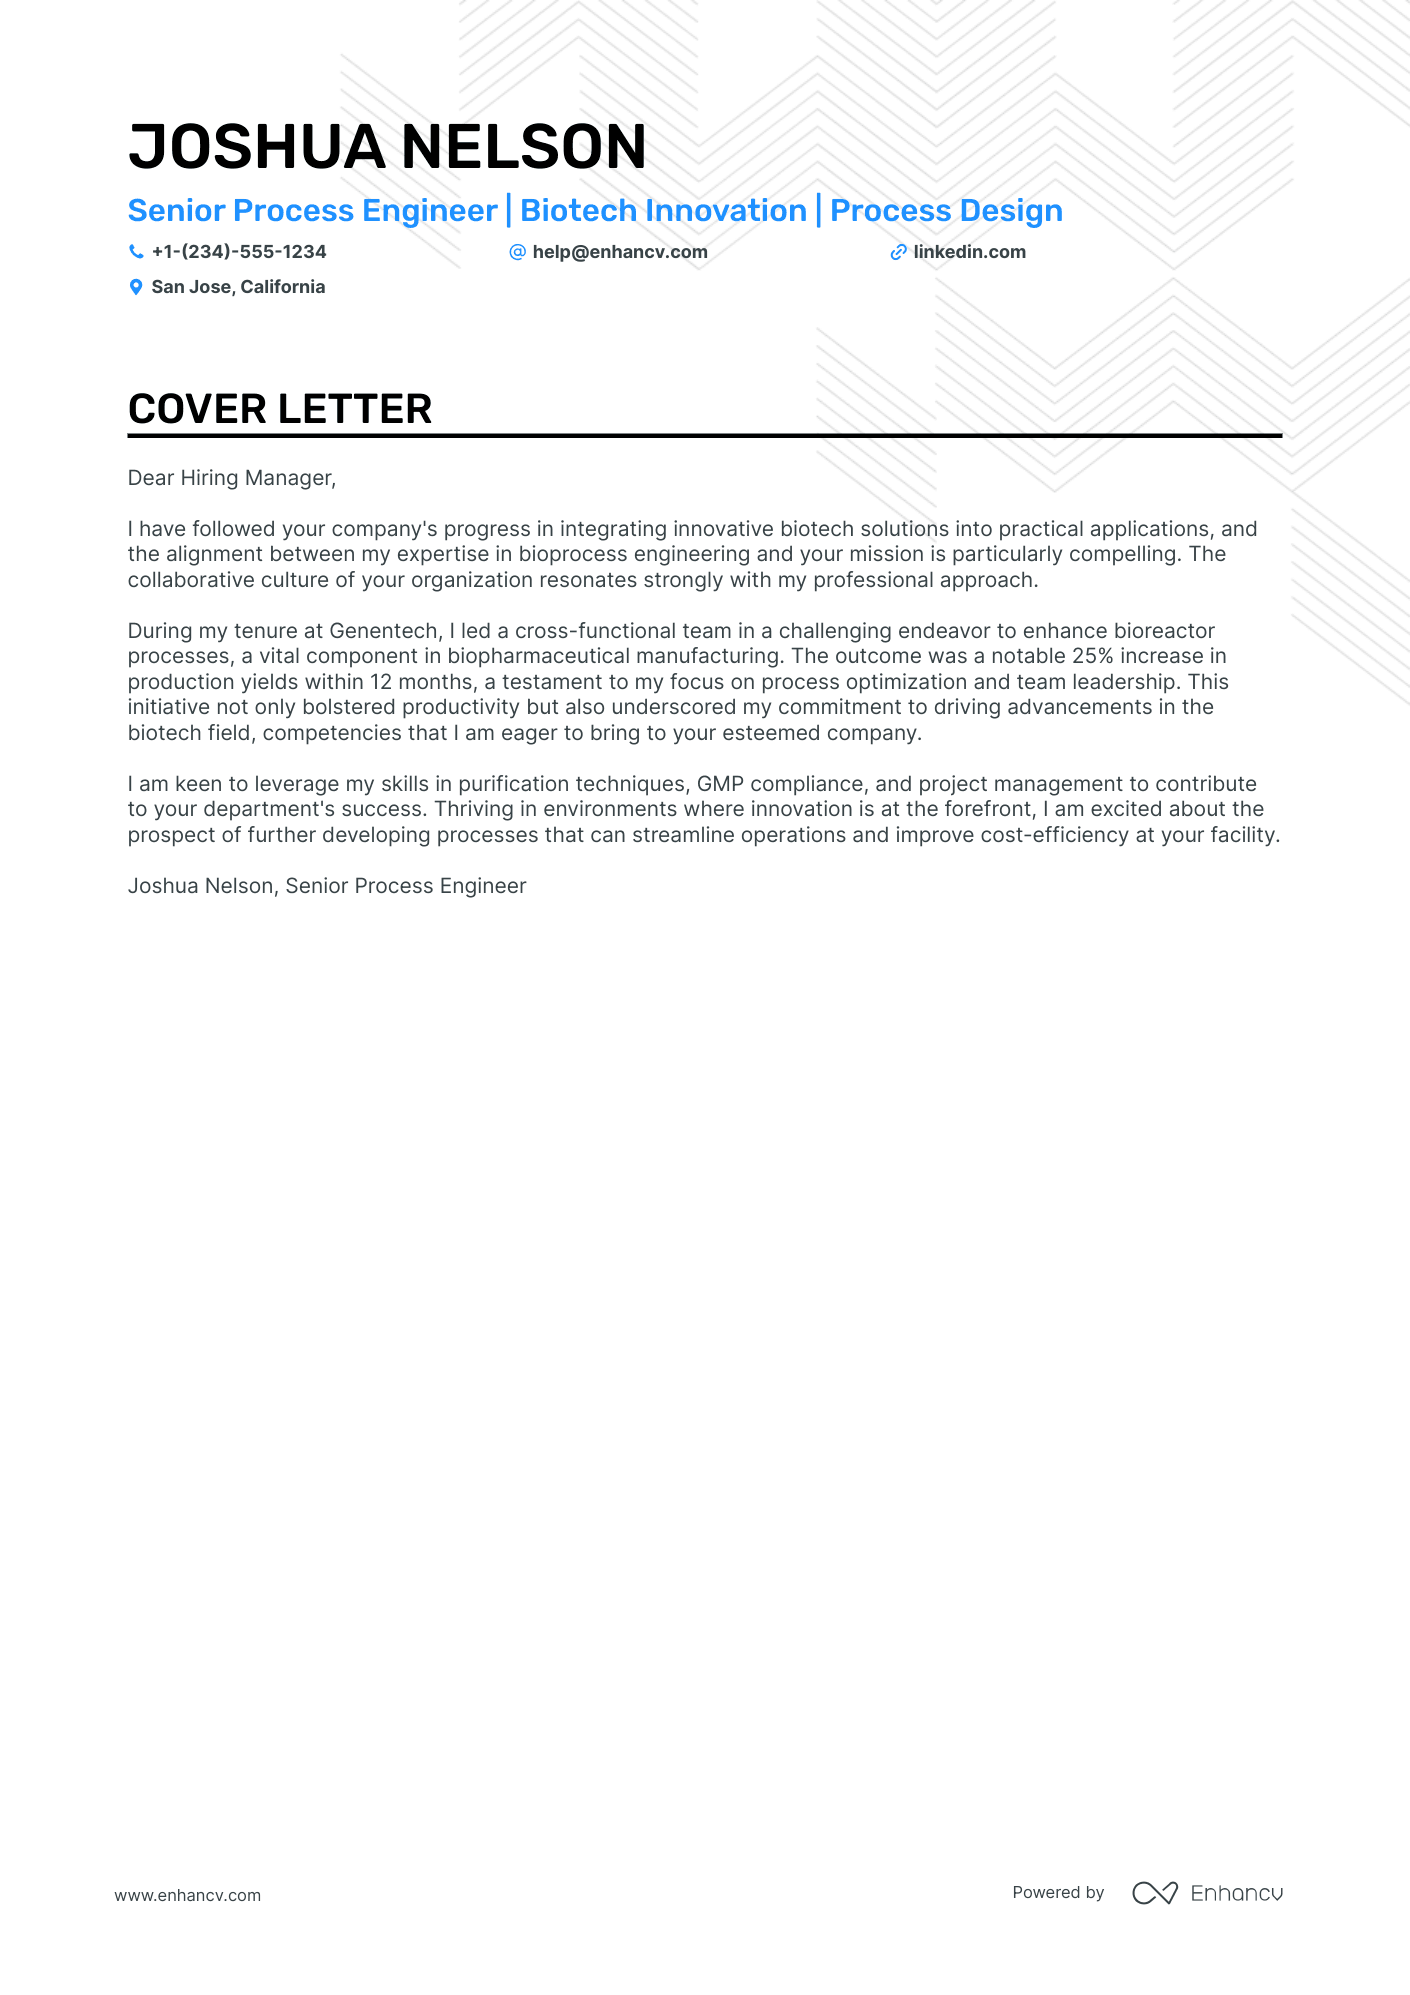 Process Engineer cover letter